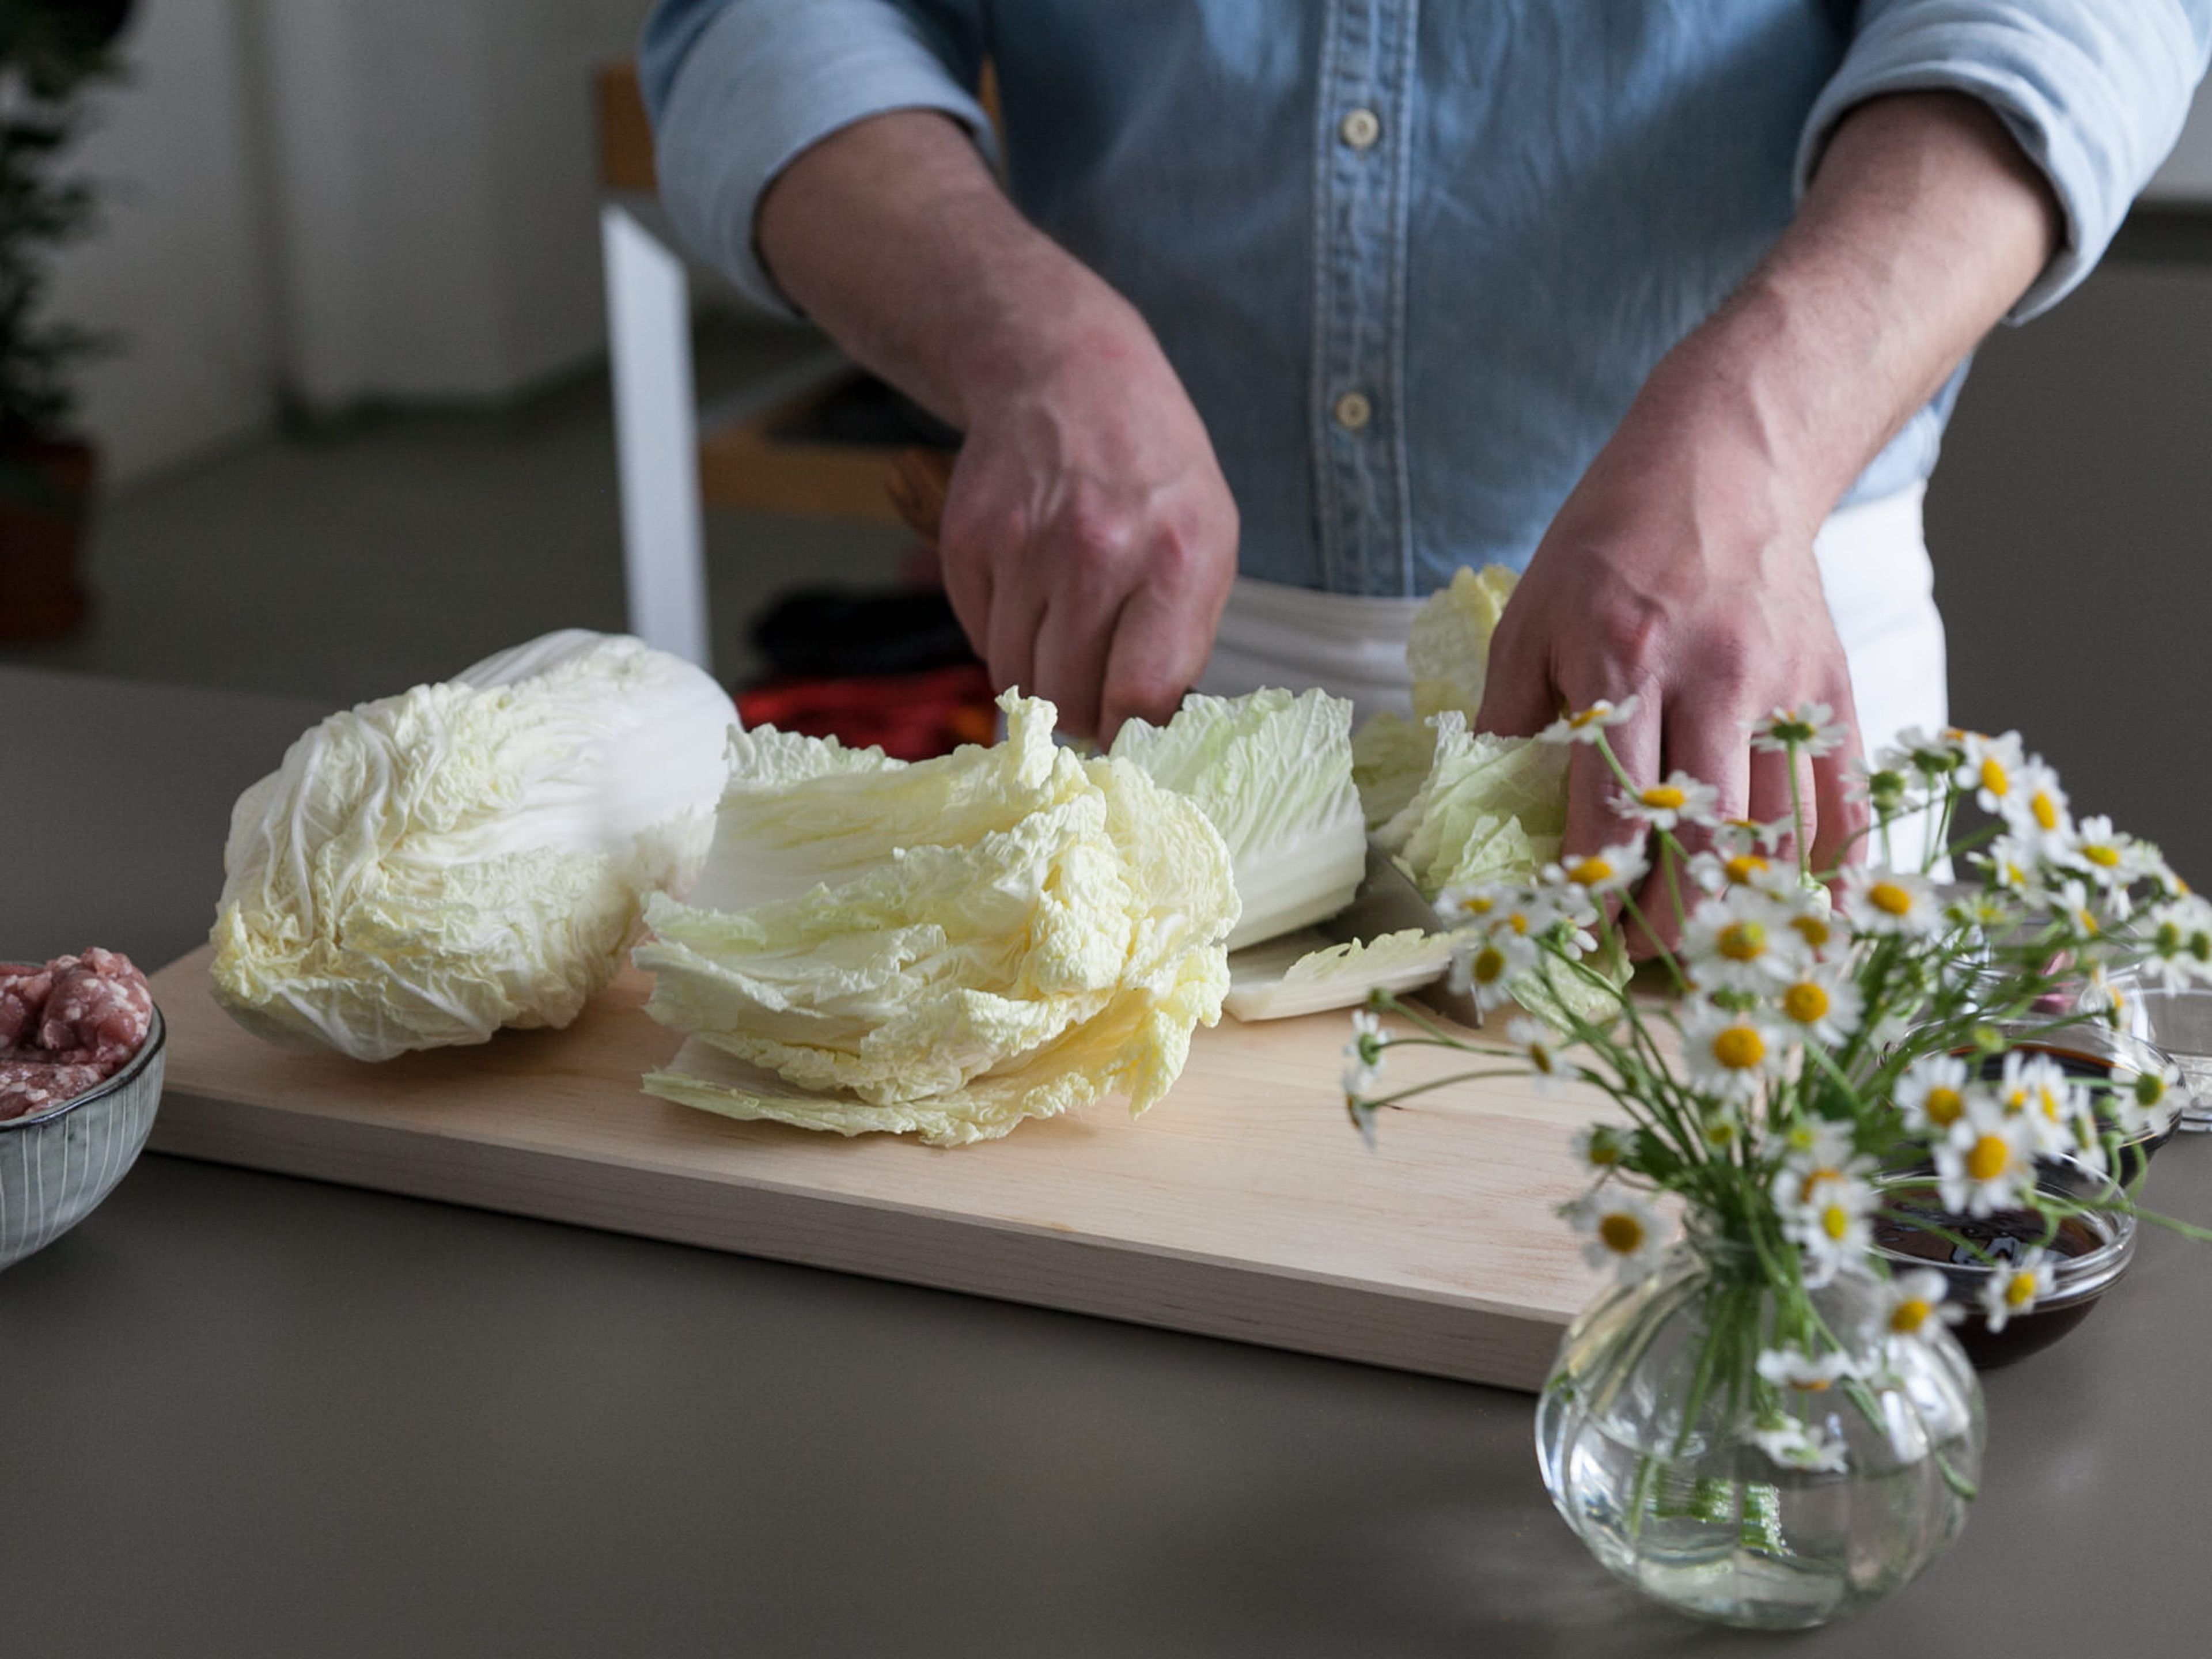 Peel and finely chop garlic, then set aside. Finely slice green onions and set aside, as well. Wash Chinese cabbage, cut off stem, and remove outer, dry leaves. According to serving size, remove some whole leaves for the cabbage rolls. Finely chop remaining inner leaves.